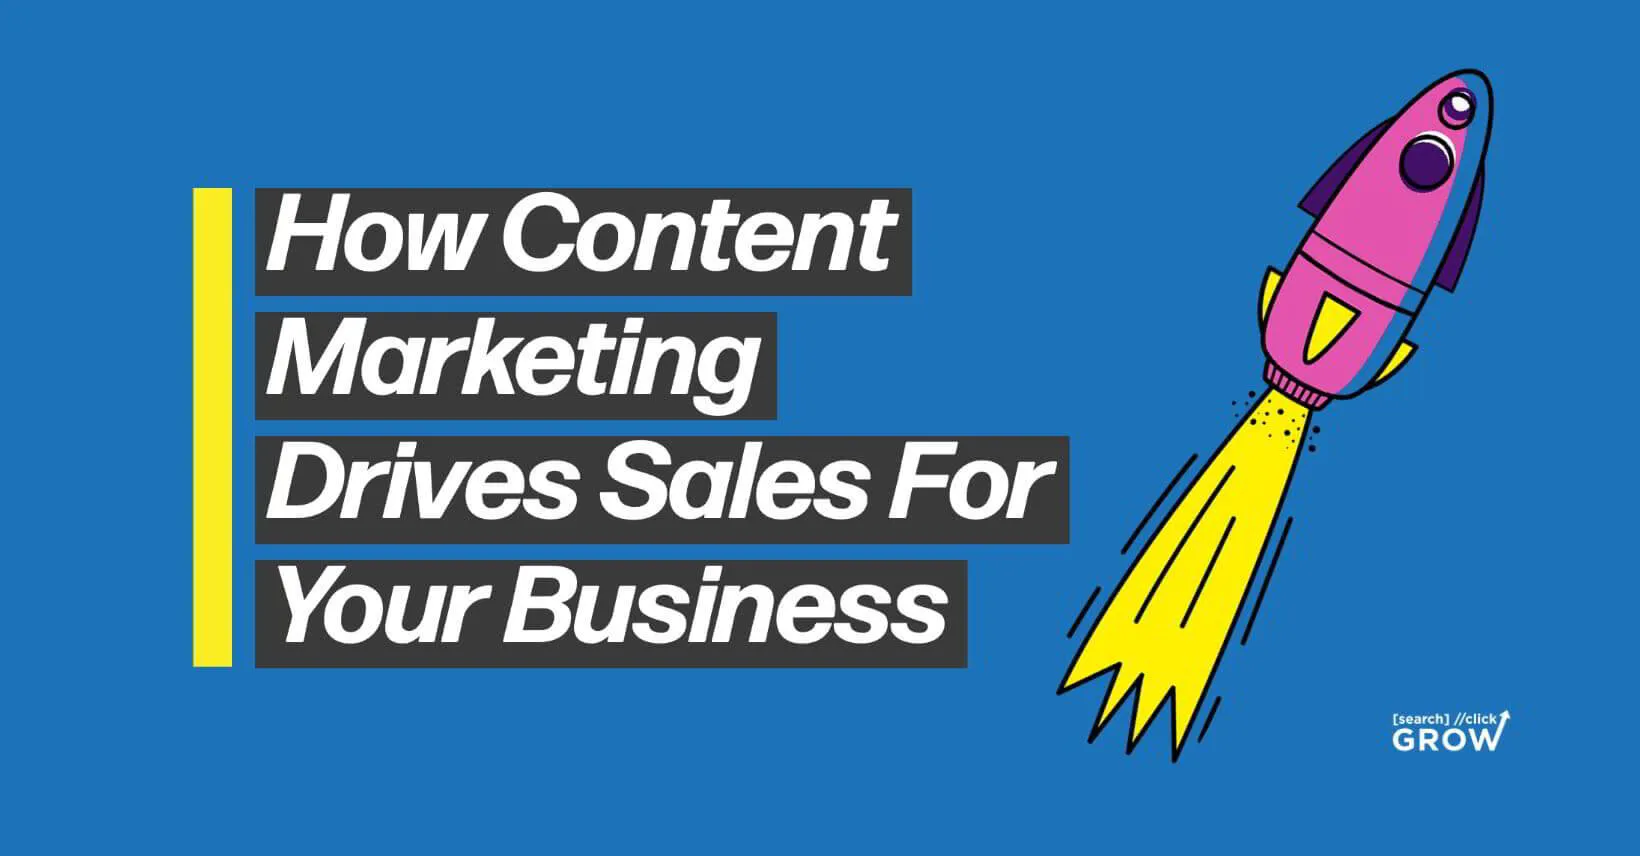 How Content Marketing Drives Sales For Your Business